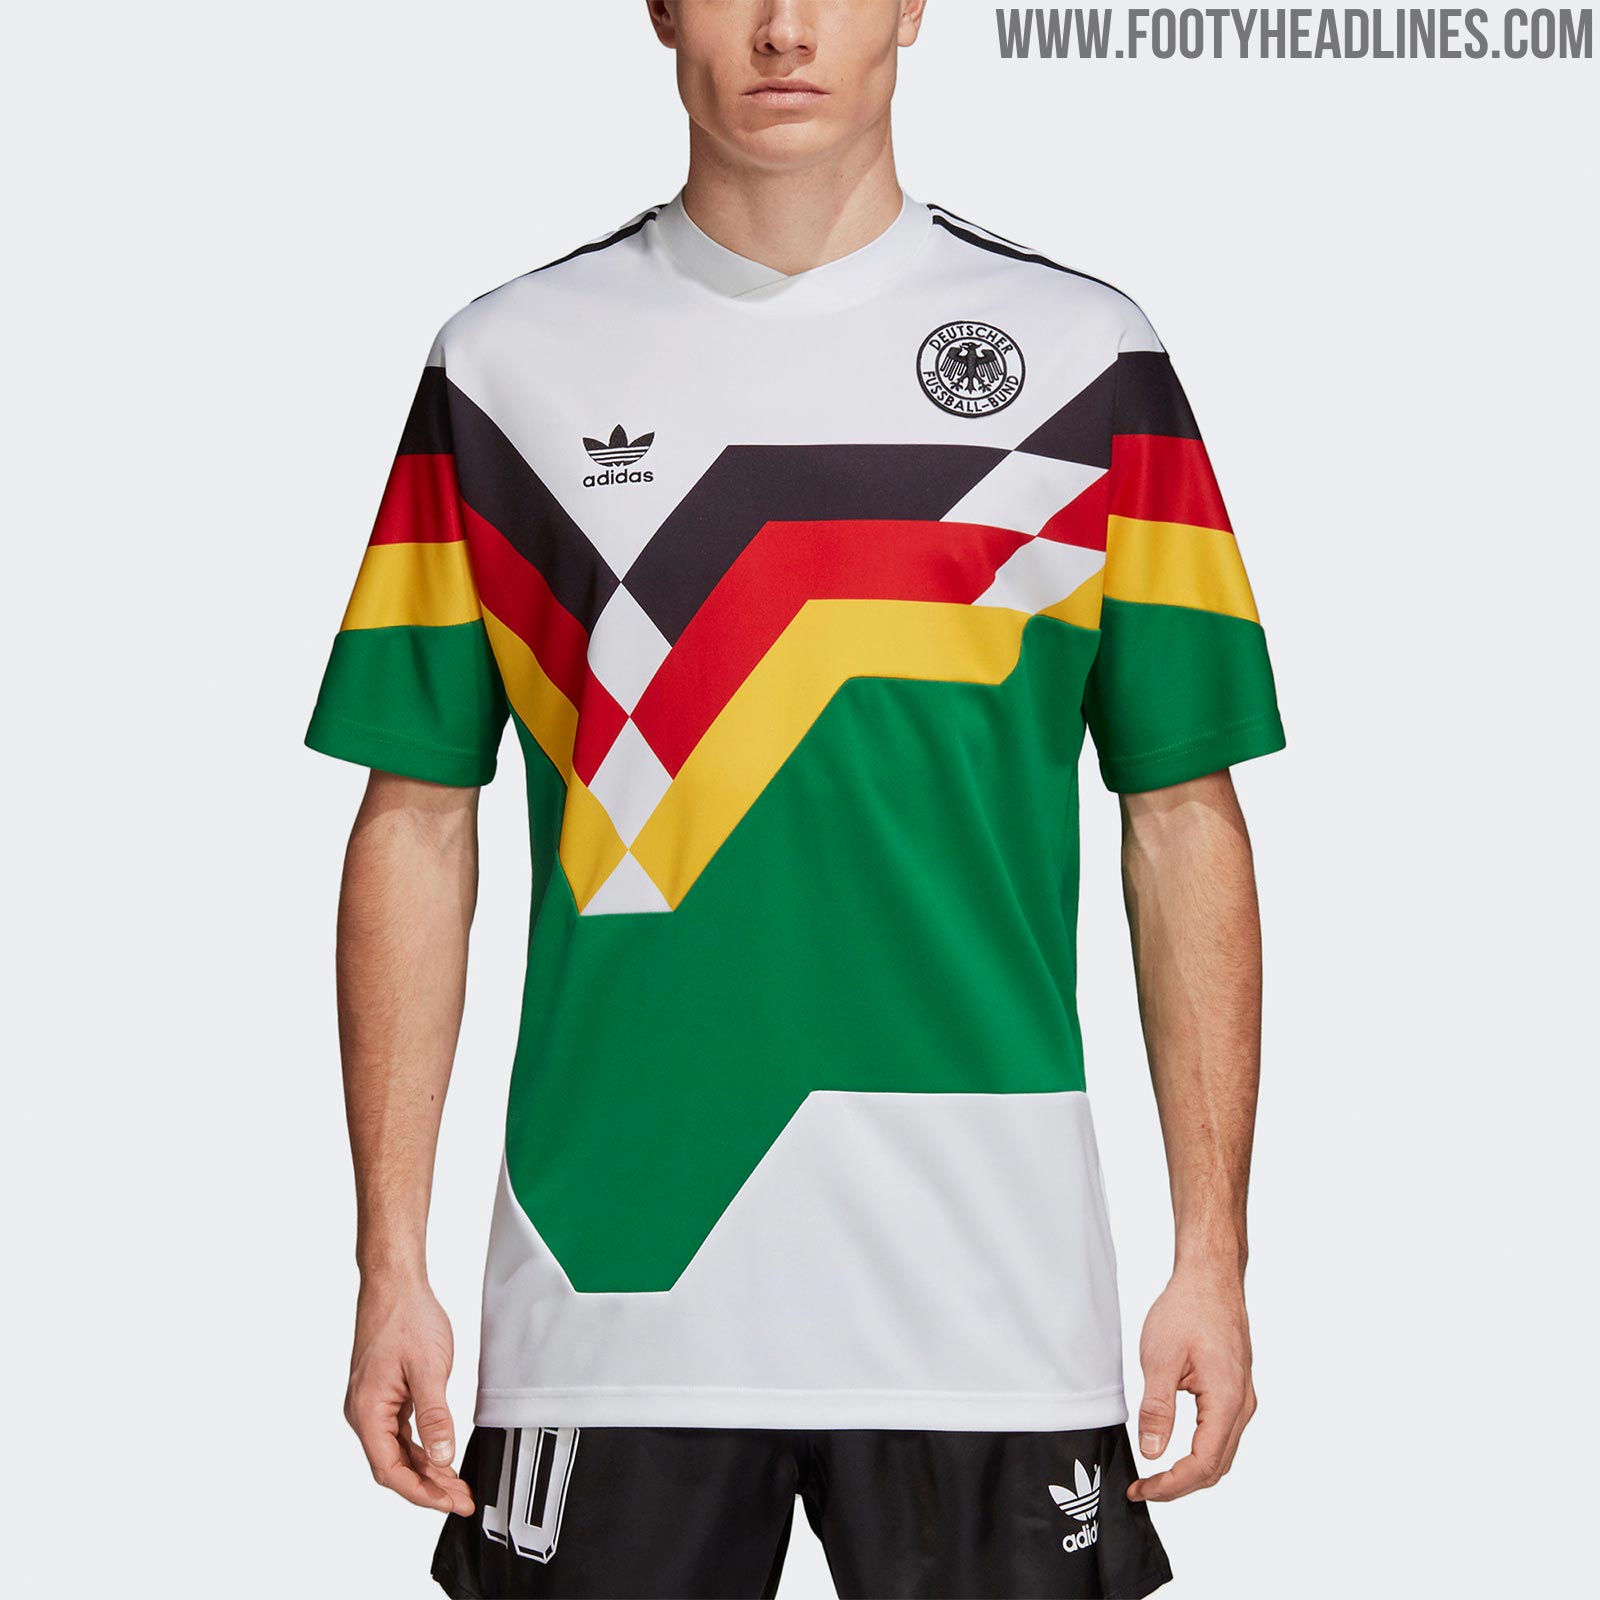 Argentina, Colombia, Germany & Russia 2018 World Cup Mash-Up Jerseys Released - Headlines